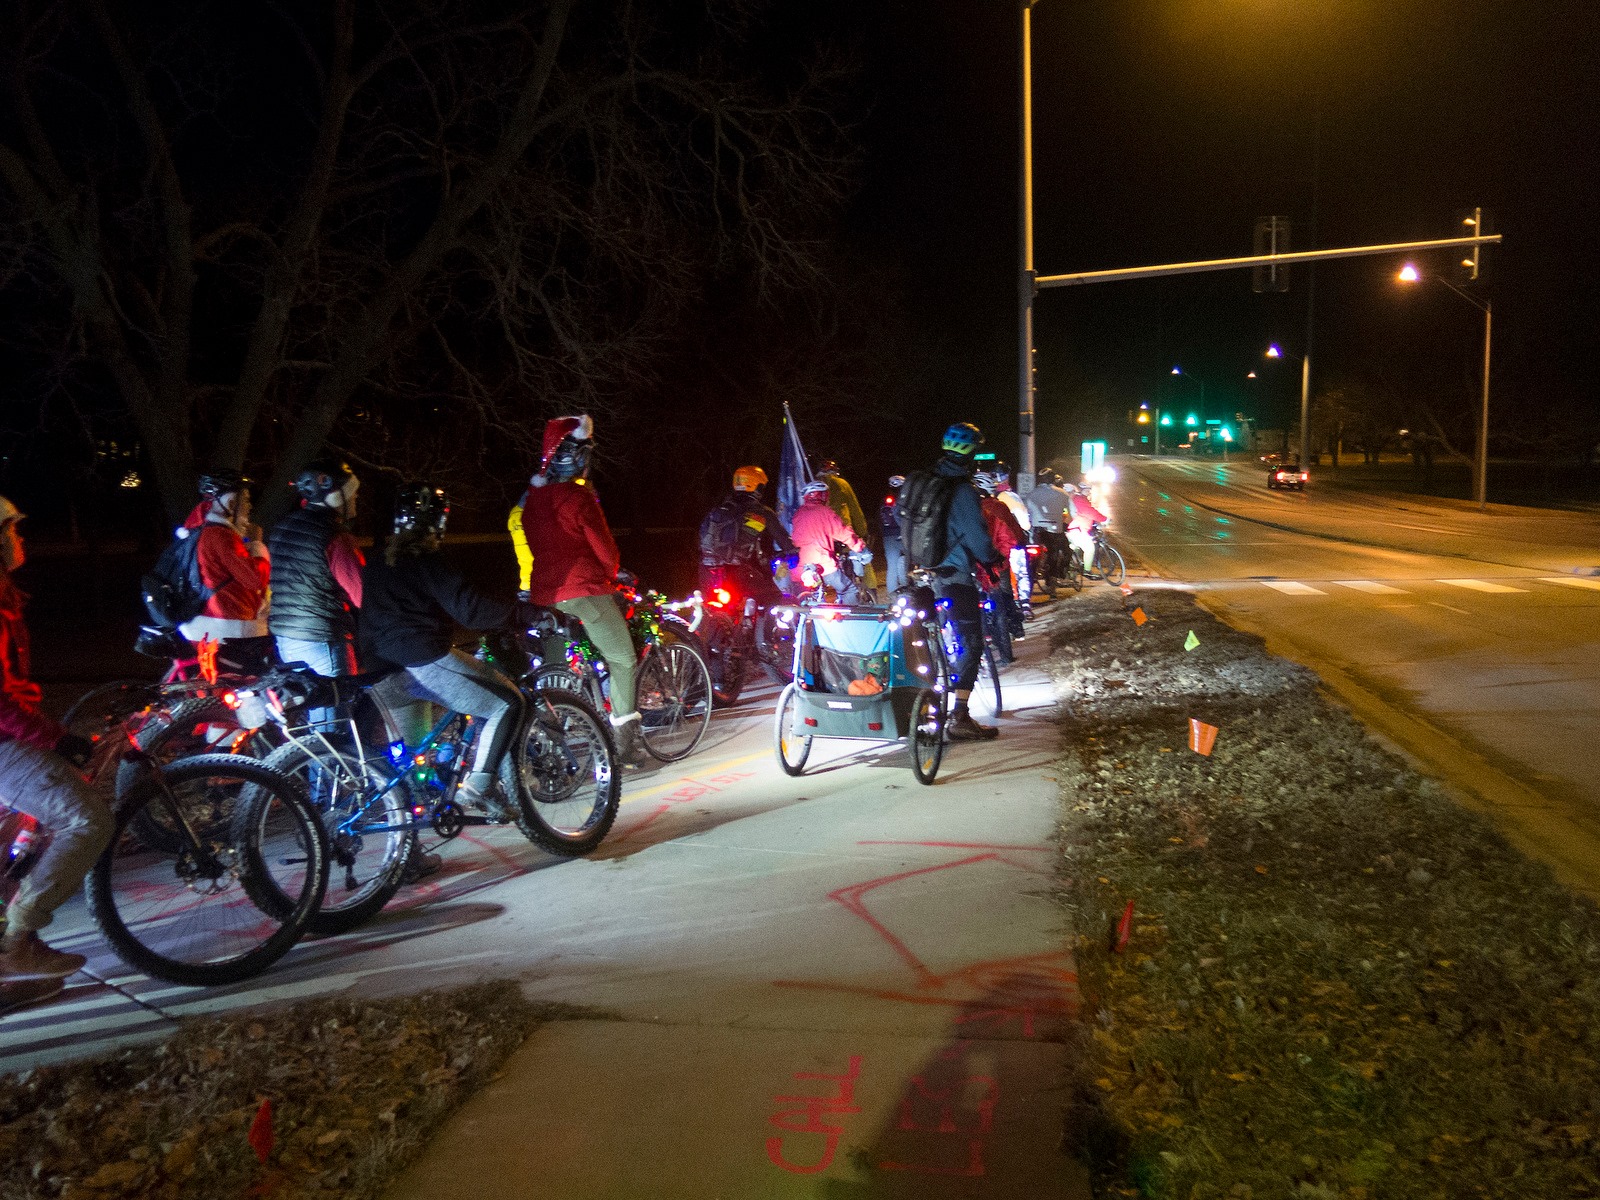 Group of bicycle riders, some dressed as santas, wait to cross a street in the dark.